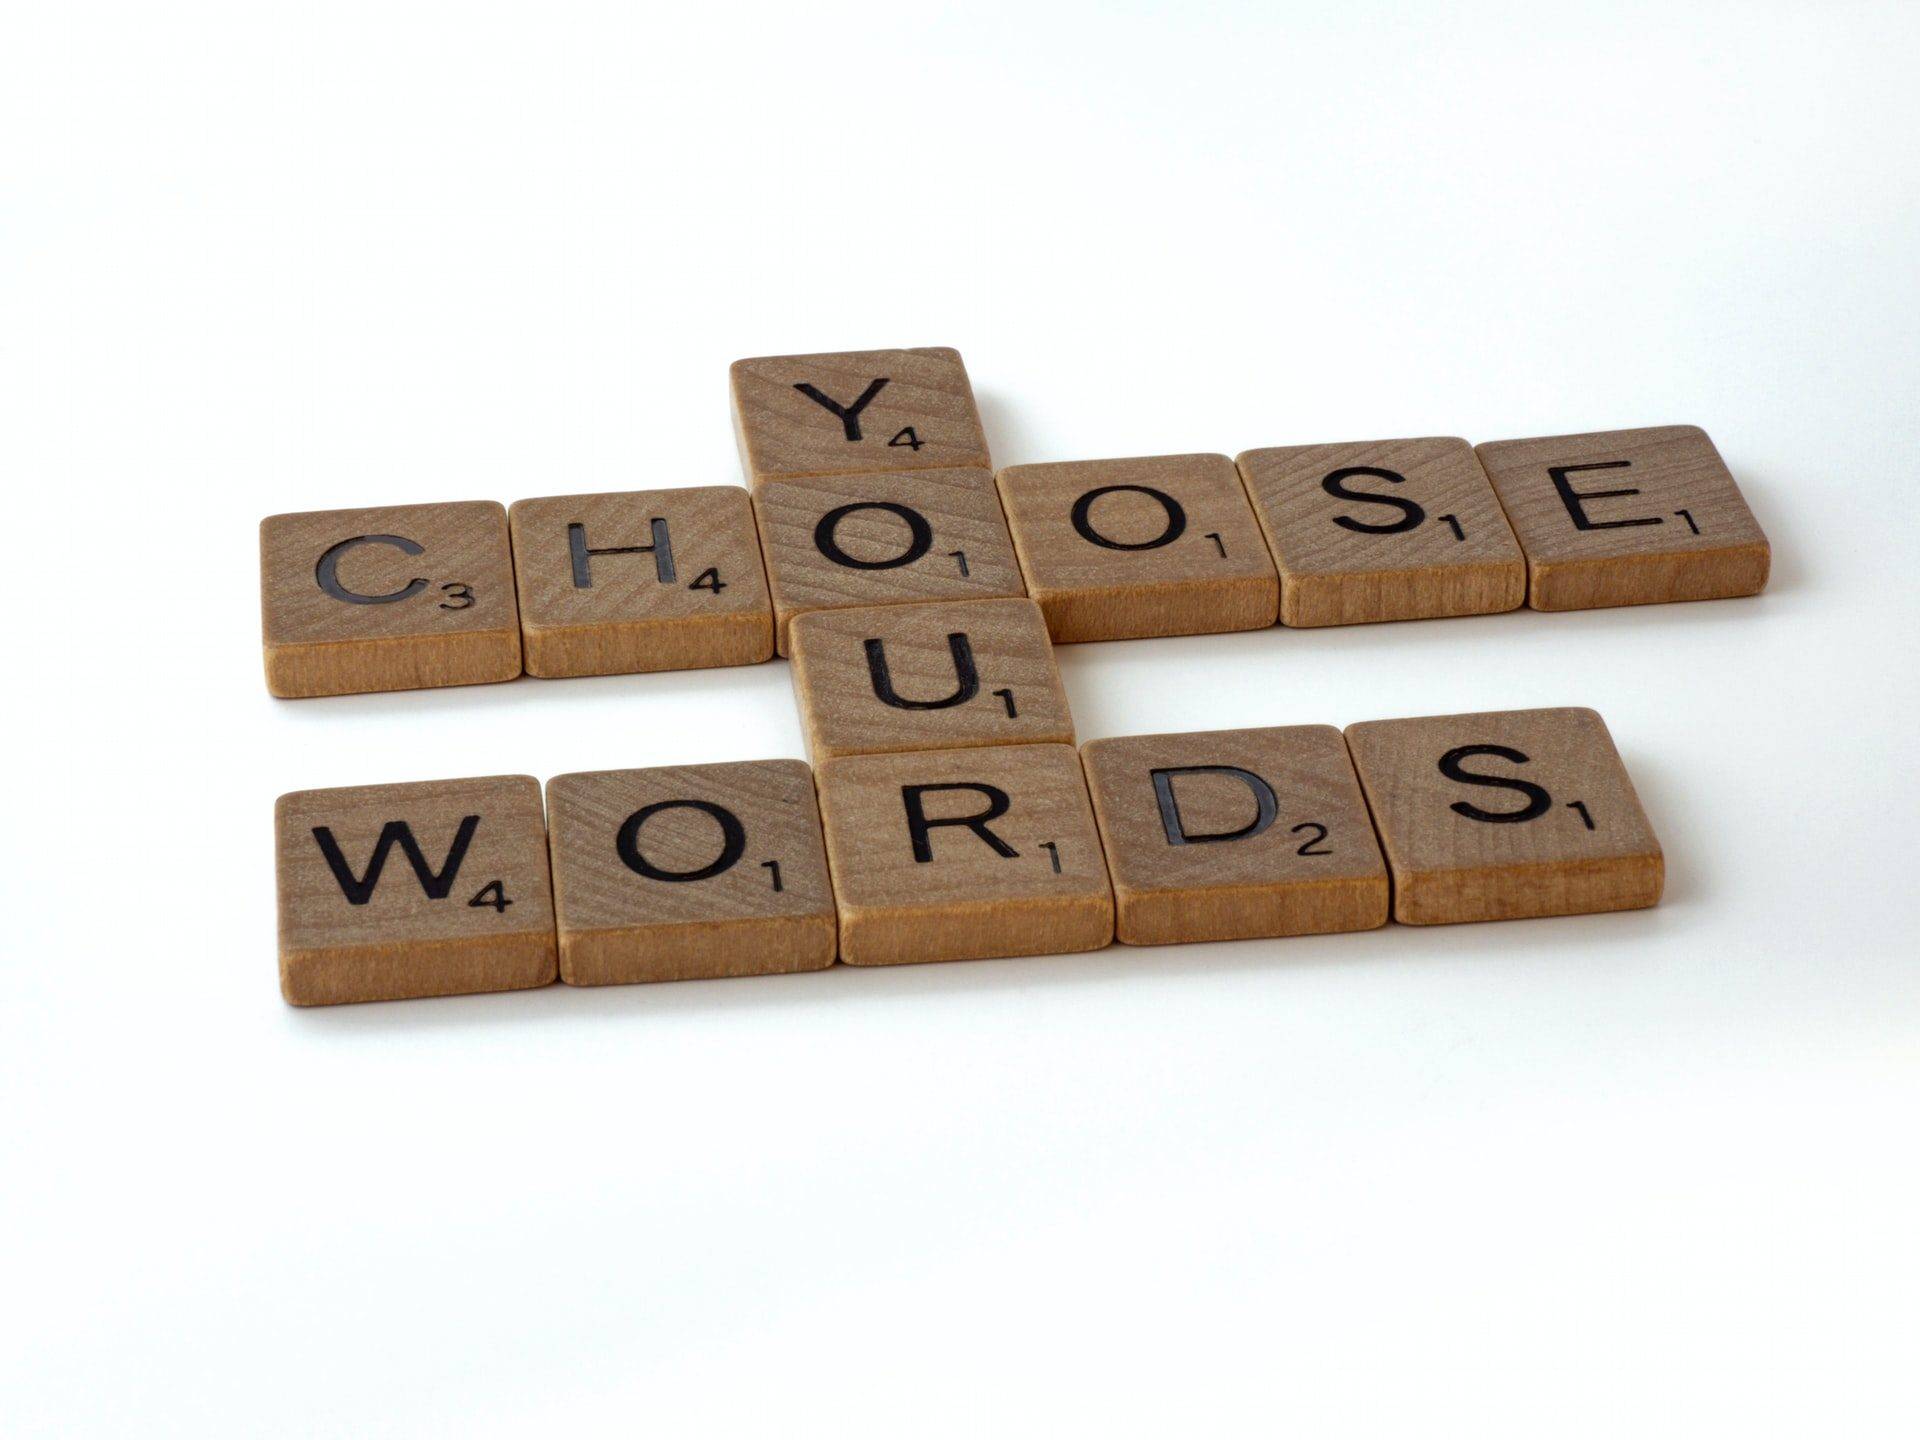 Choose your words